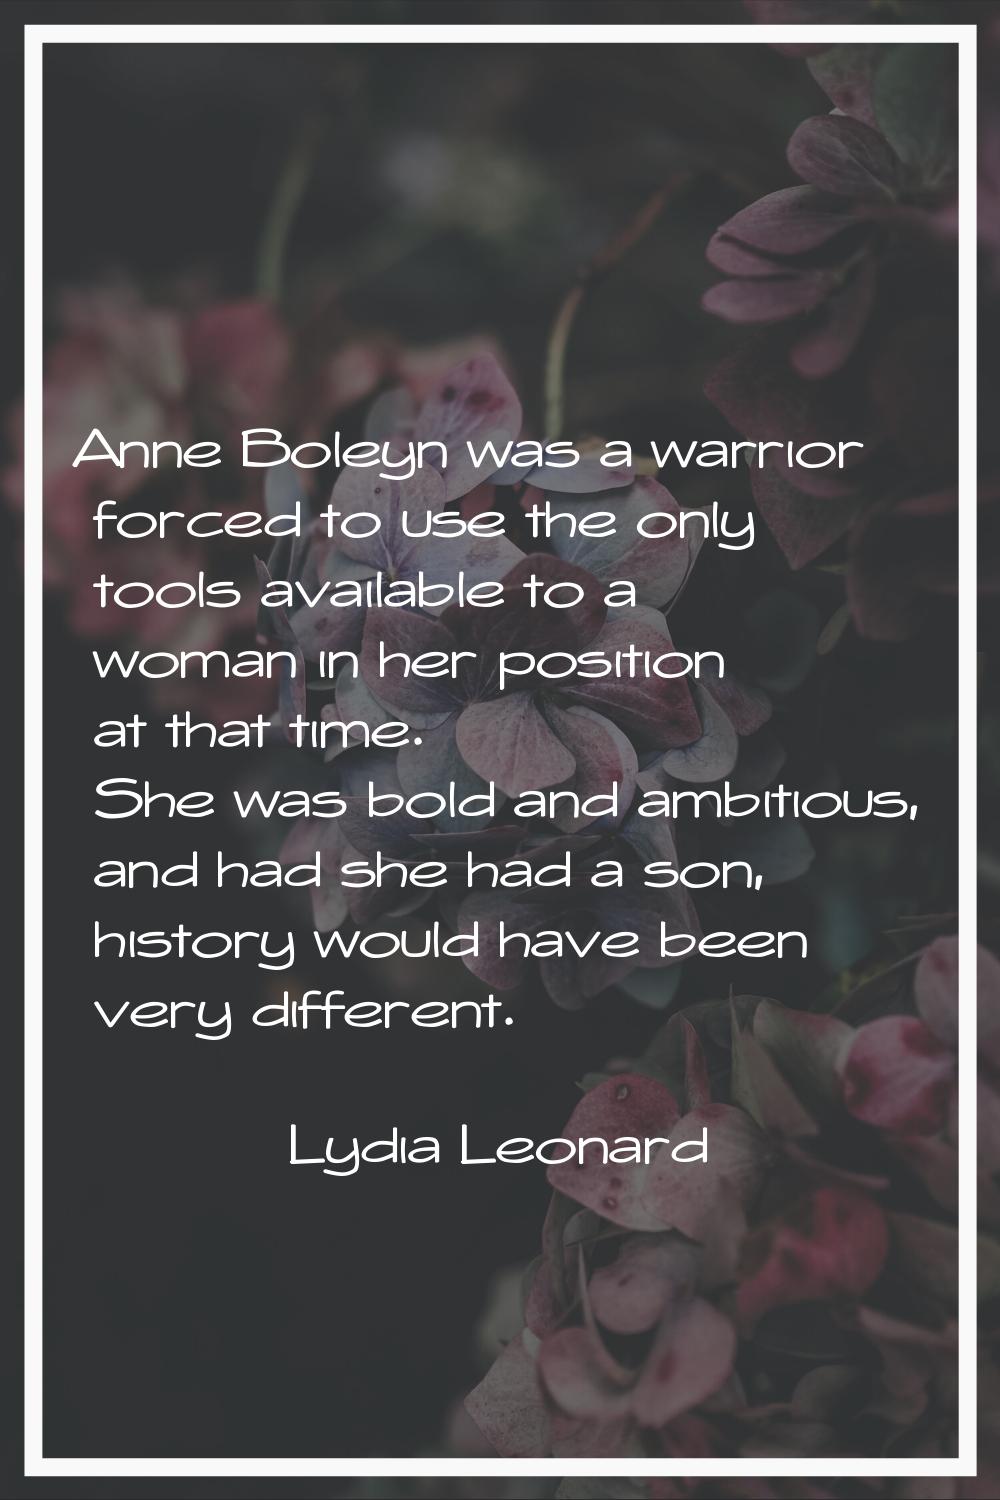 Anne Boleyn was a warrior forced to use the only tools available to a woman in her position at that